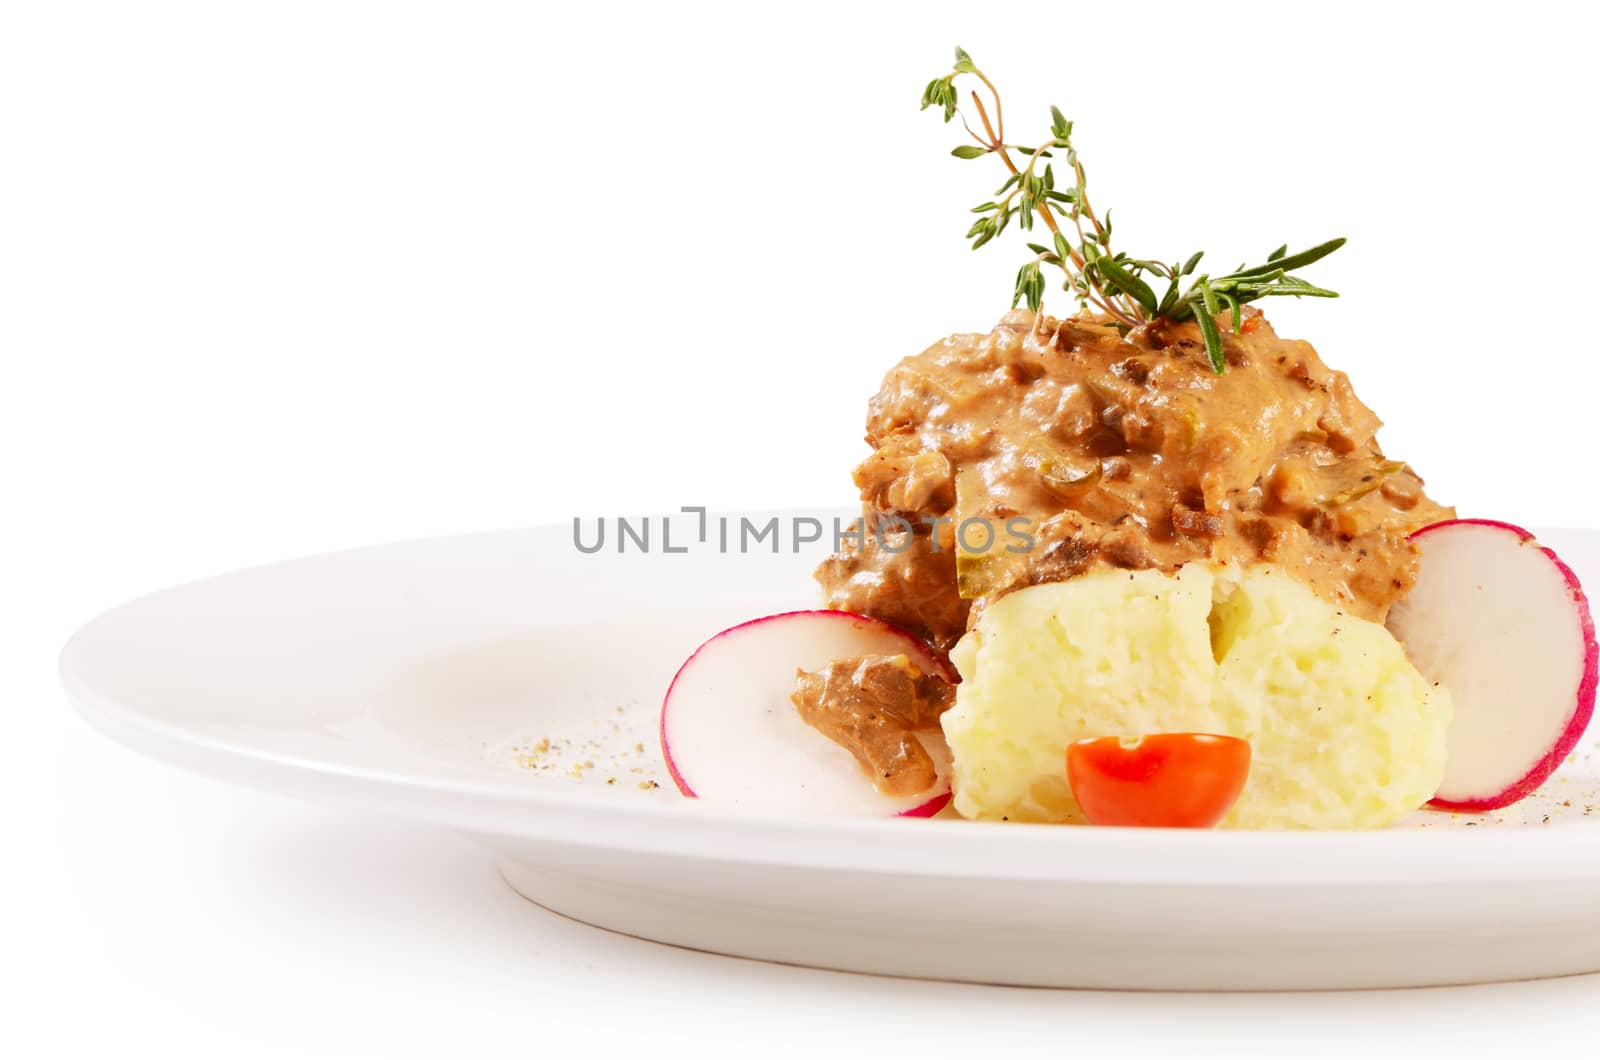 Potatoes with gravy, vegetables and meat by SvetaVo